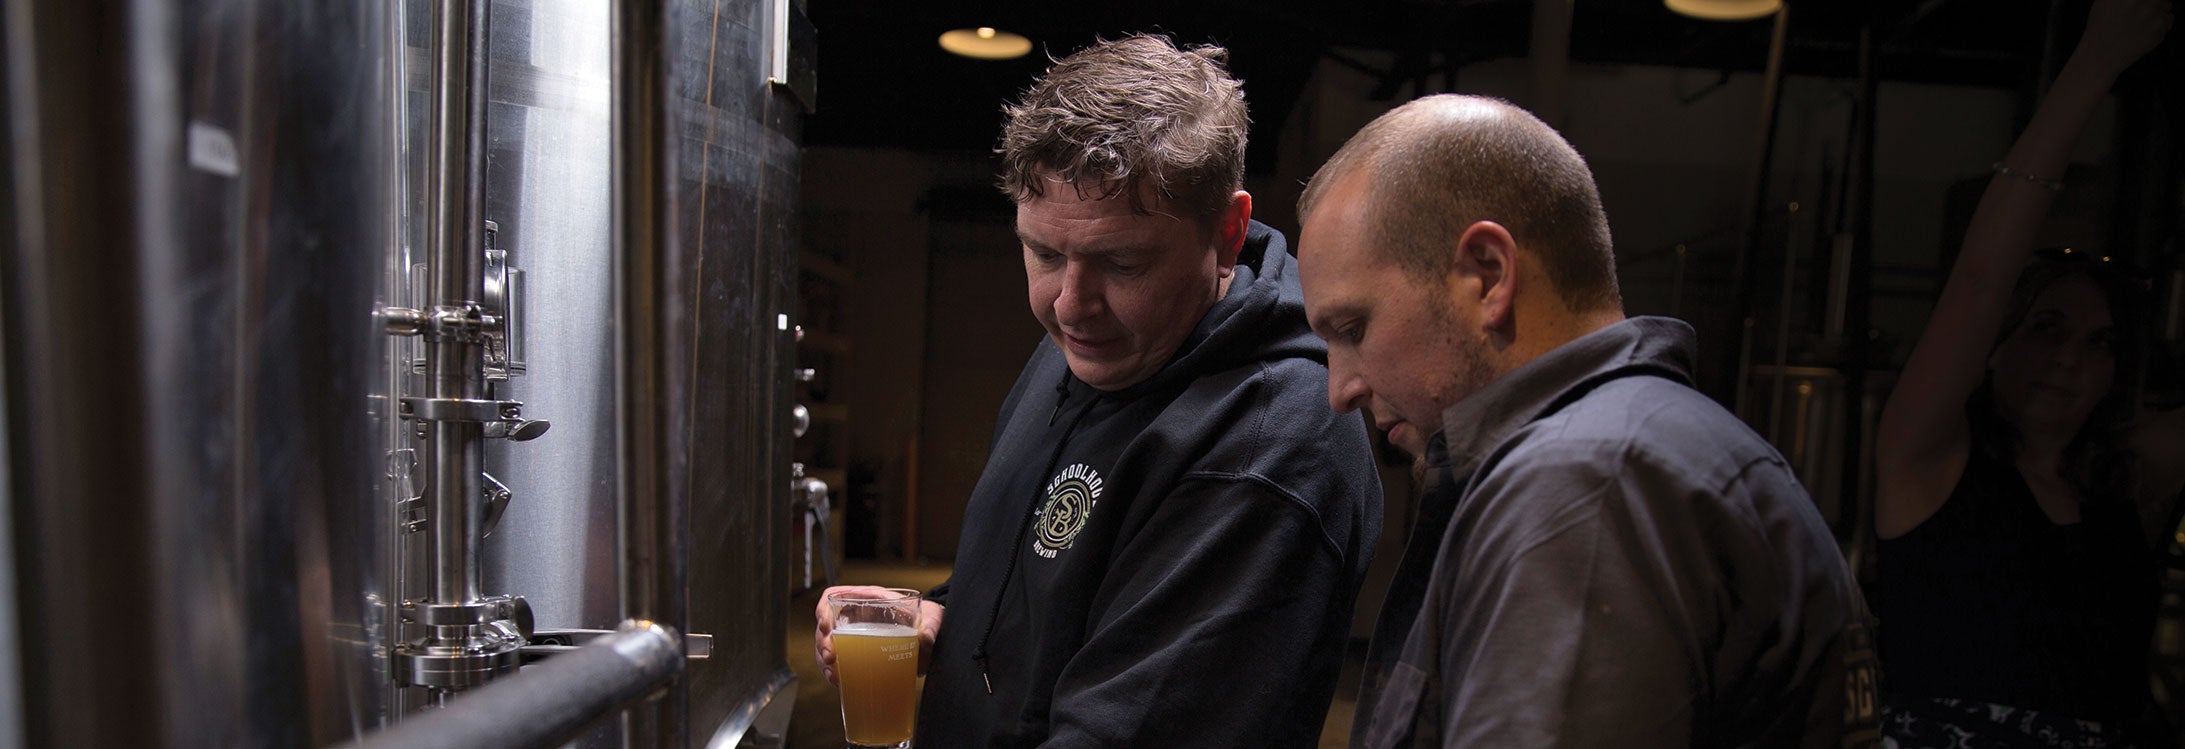 Thomas Monti, left, and Justin Waller opened Schoolhouse Brewery last year